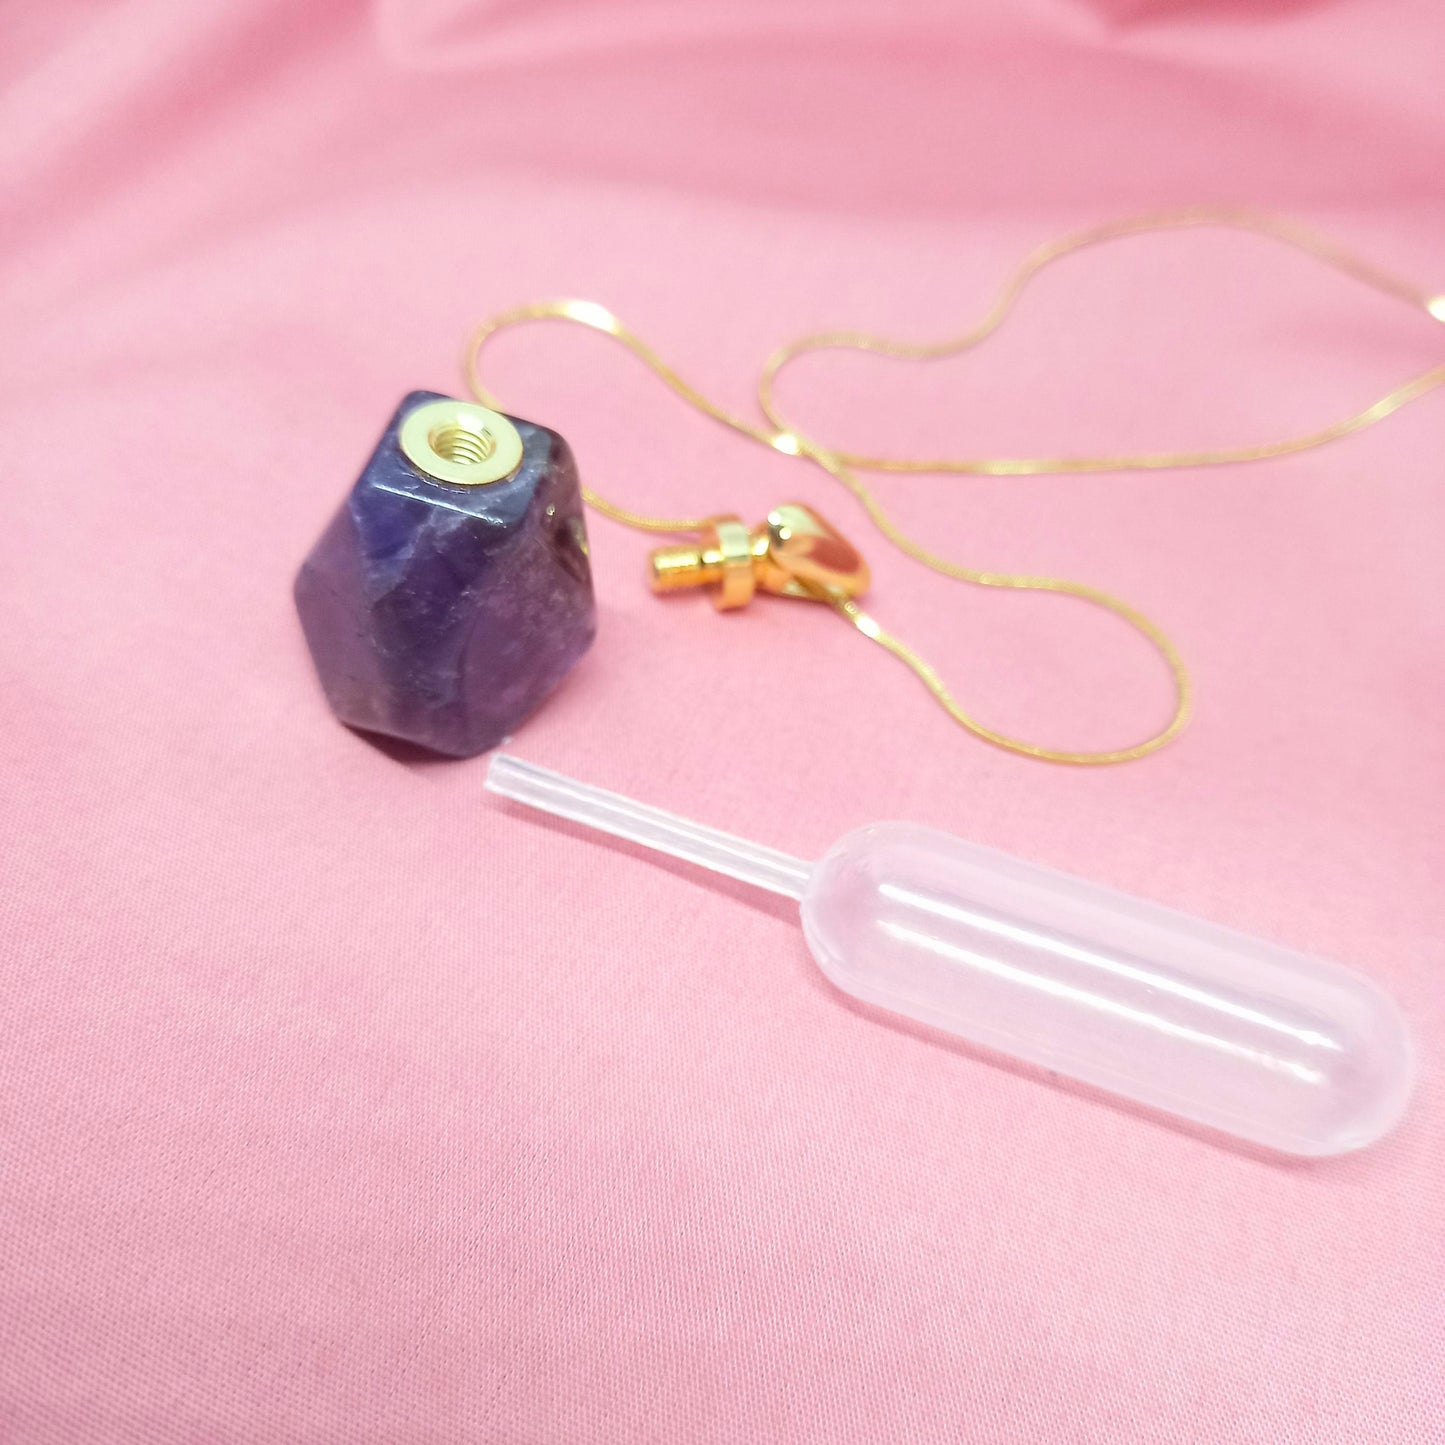 VIOLE PENDANT IN NATURAL AMETHYST STONES + STAINLESS STEEL NECKLACE